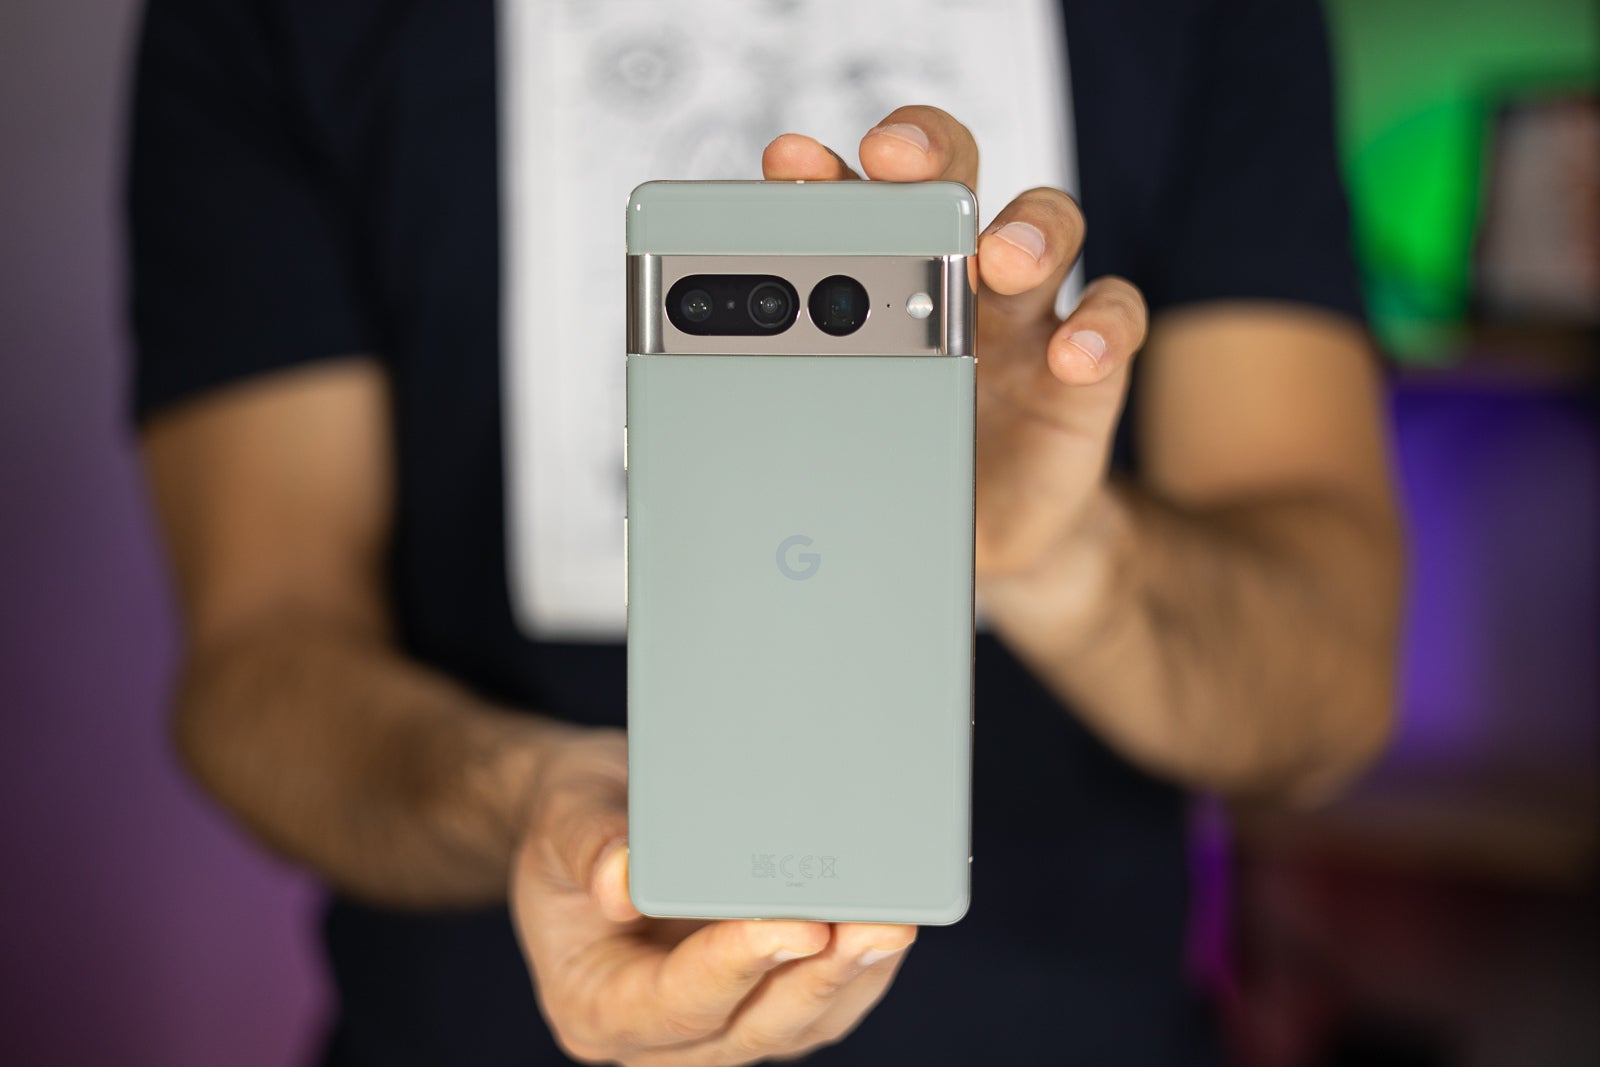 The Google Pixel 7 Pro’s camera bump is quite unique, and also shared with the Pixel 7. - Black Friday is here with Visible and offers a new iPhone SE or a Google Pixel 7 with up to $400 off!